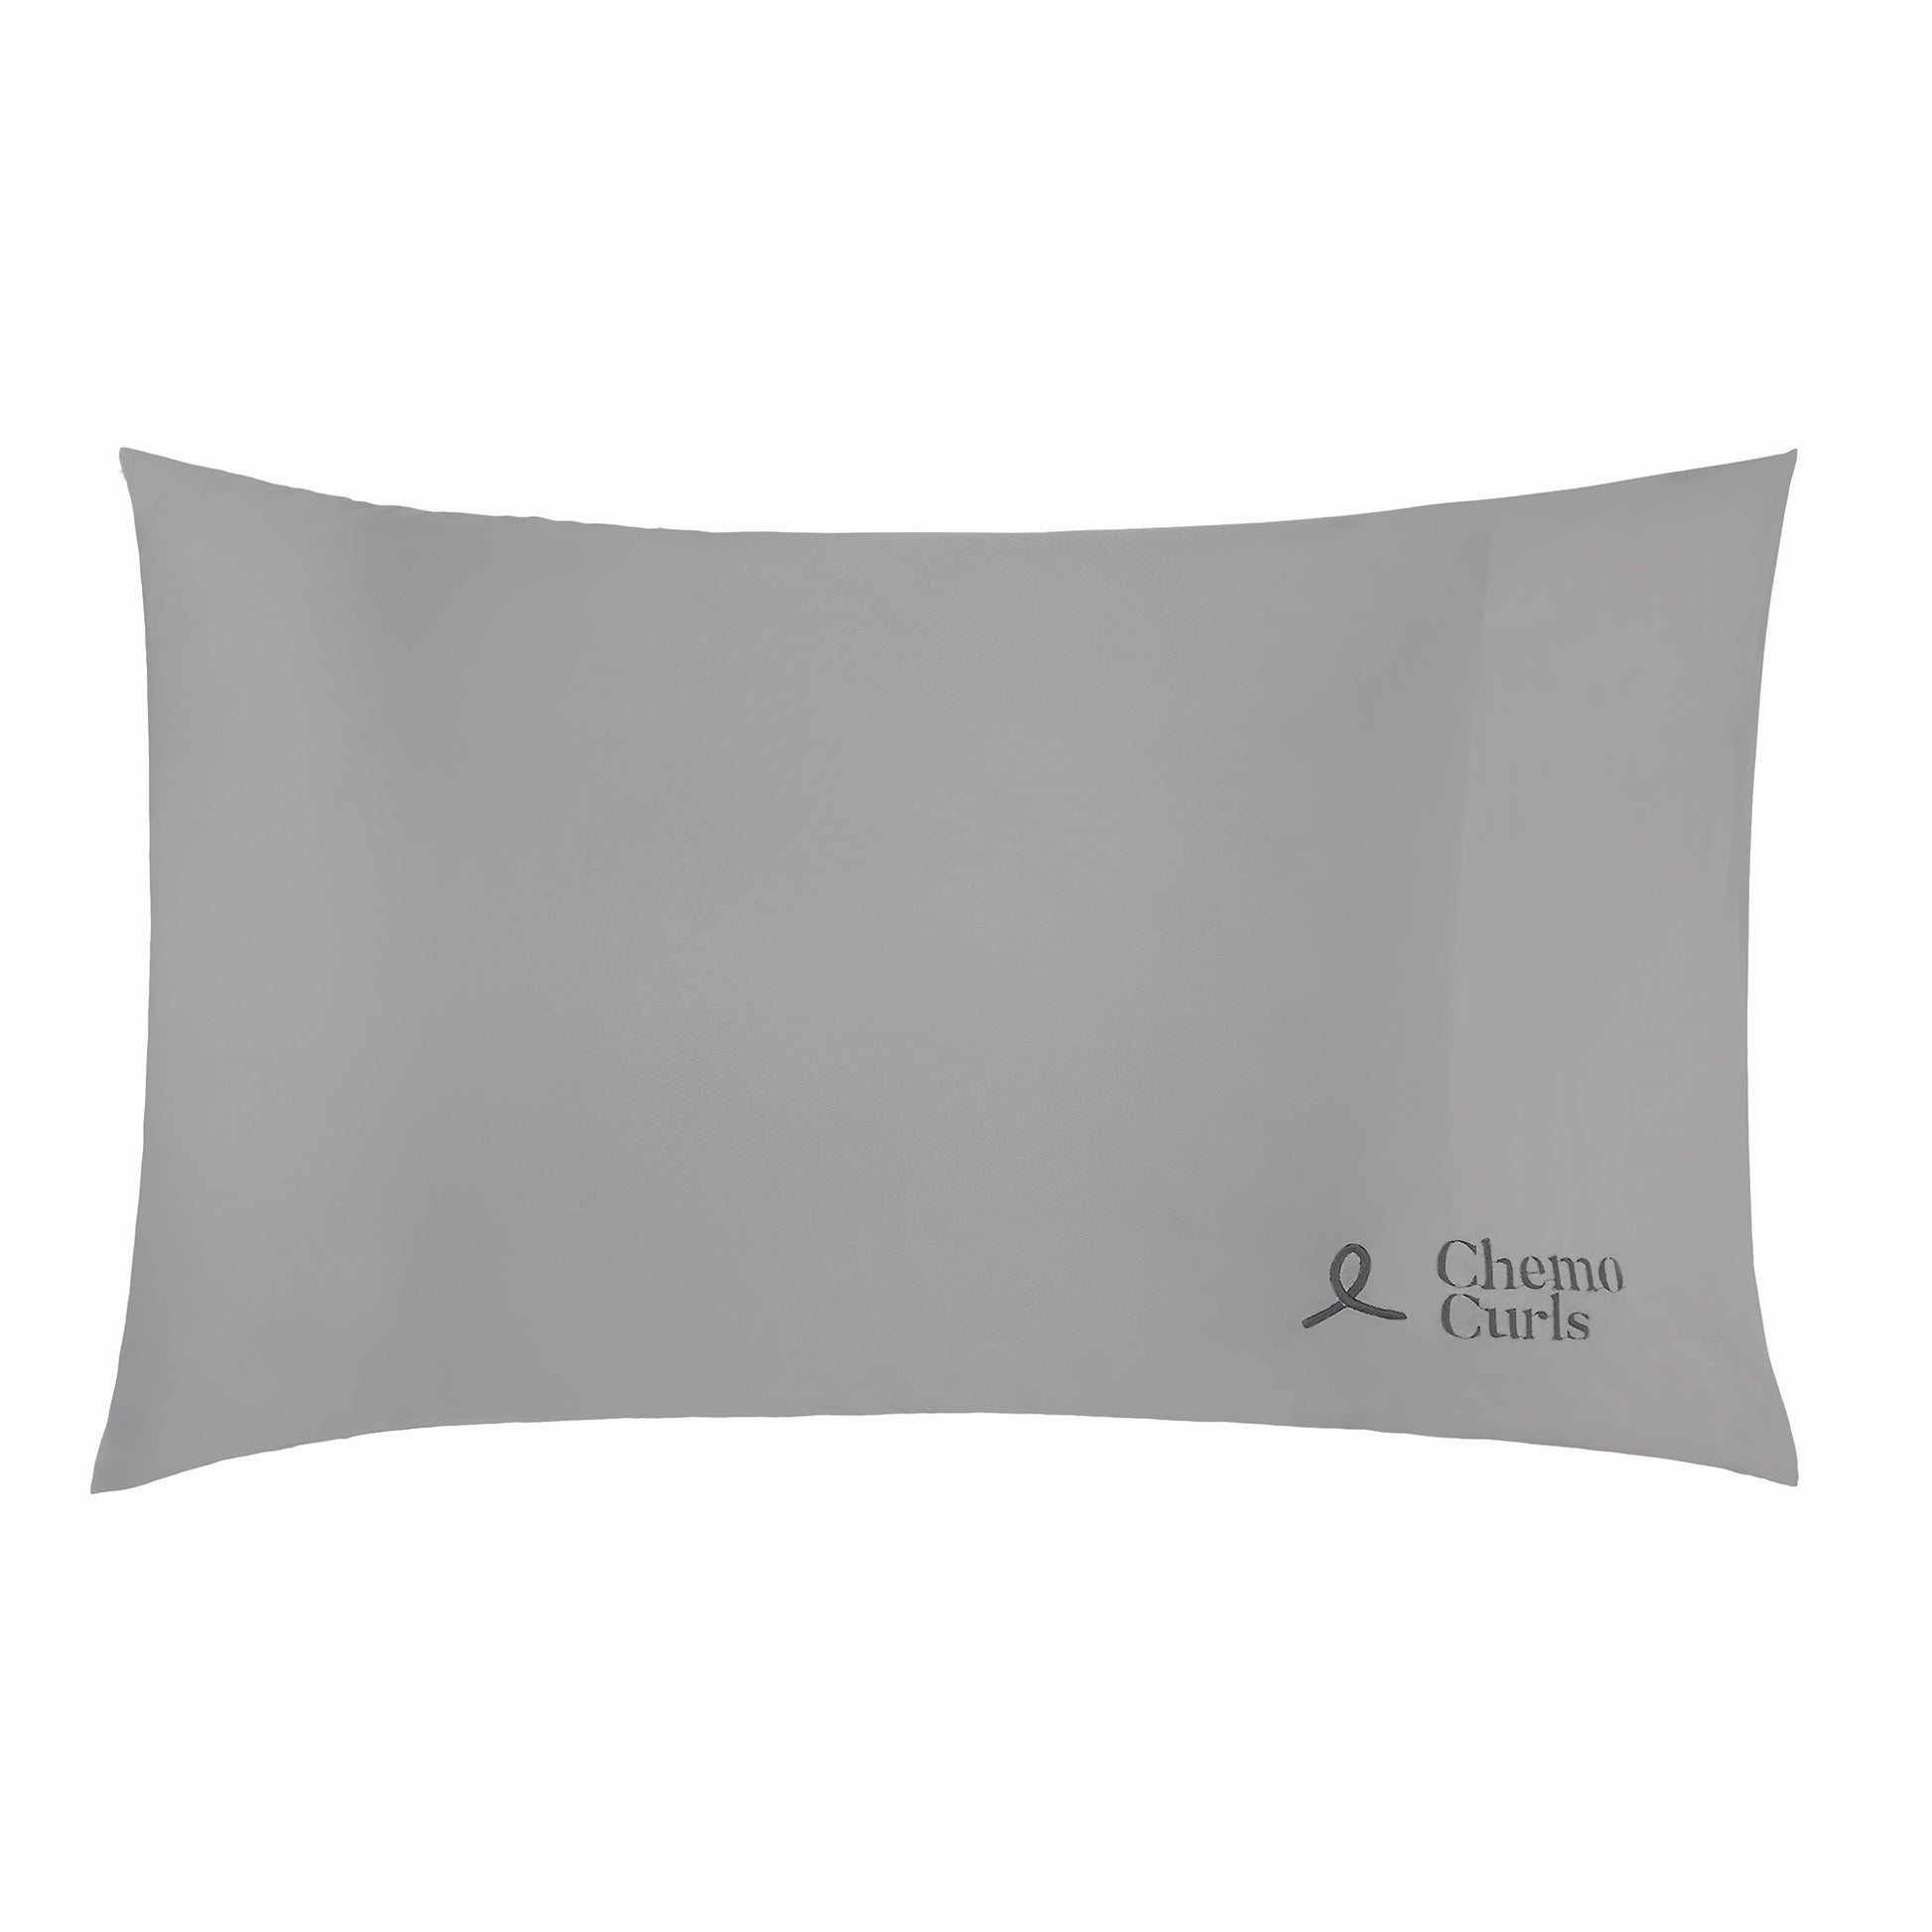 An image of a grey satin pillowcase with a sleek and smooth surface. The soft grey color of the pillowcase exudes elegance and sophistication. The Chemo Curls logo is skillfully embroidered in black thread on the lower left corner, adding a personalized touch. The satin fabric catches the light, creating a subtle sheen and highlighting the luxurious texture. This image portrays a sense of comfort, style, and attention to detail.